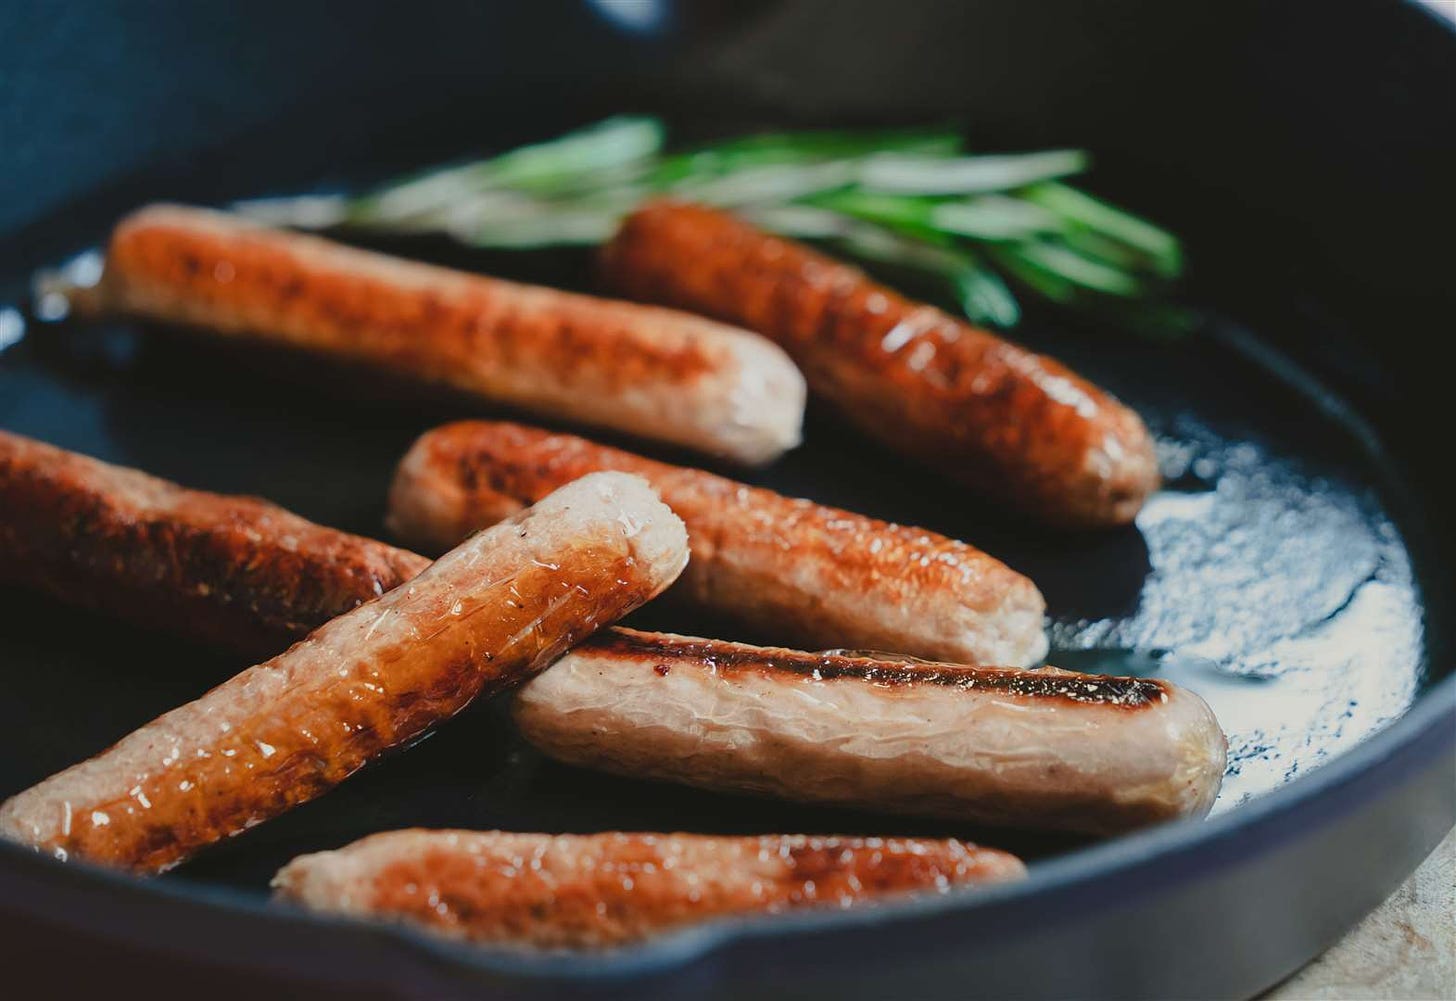 Are you ready for Meatable's cultivated pork sausages?